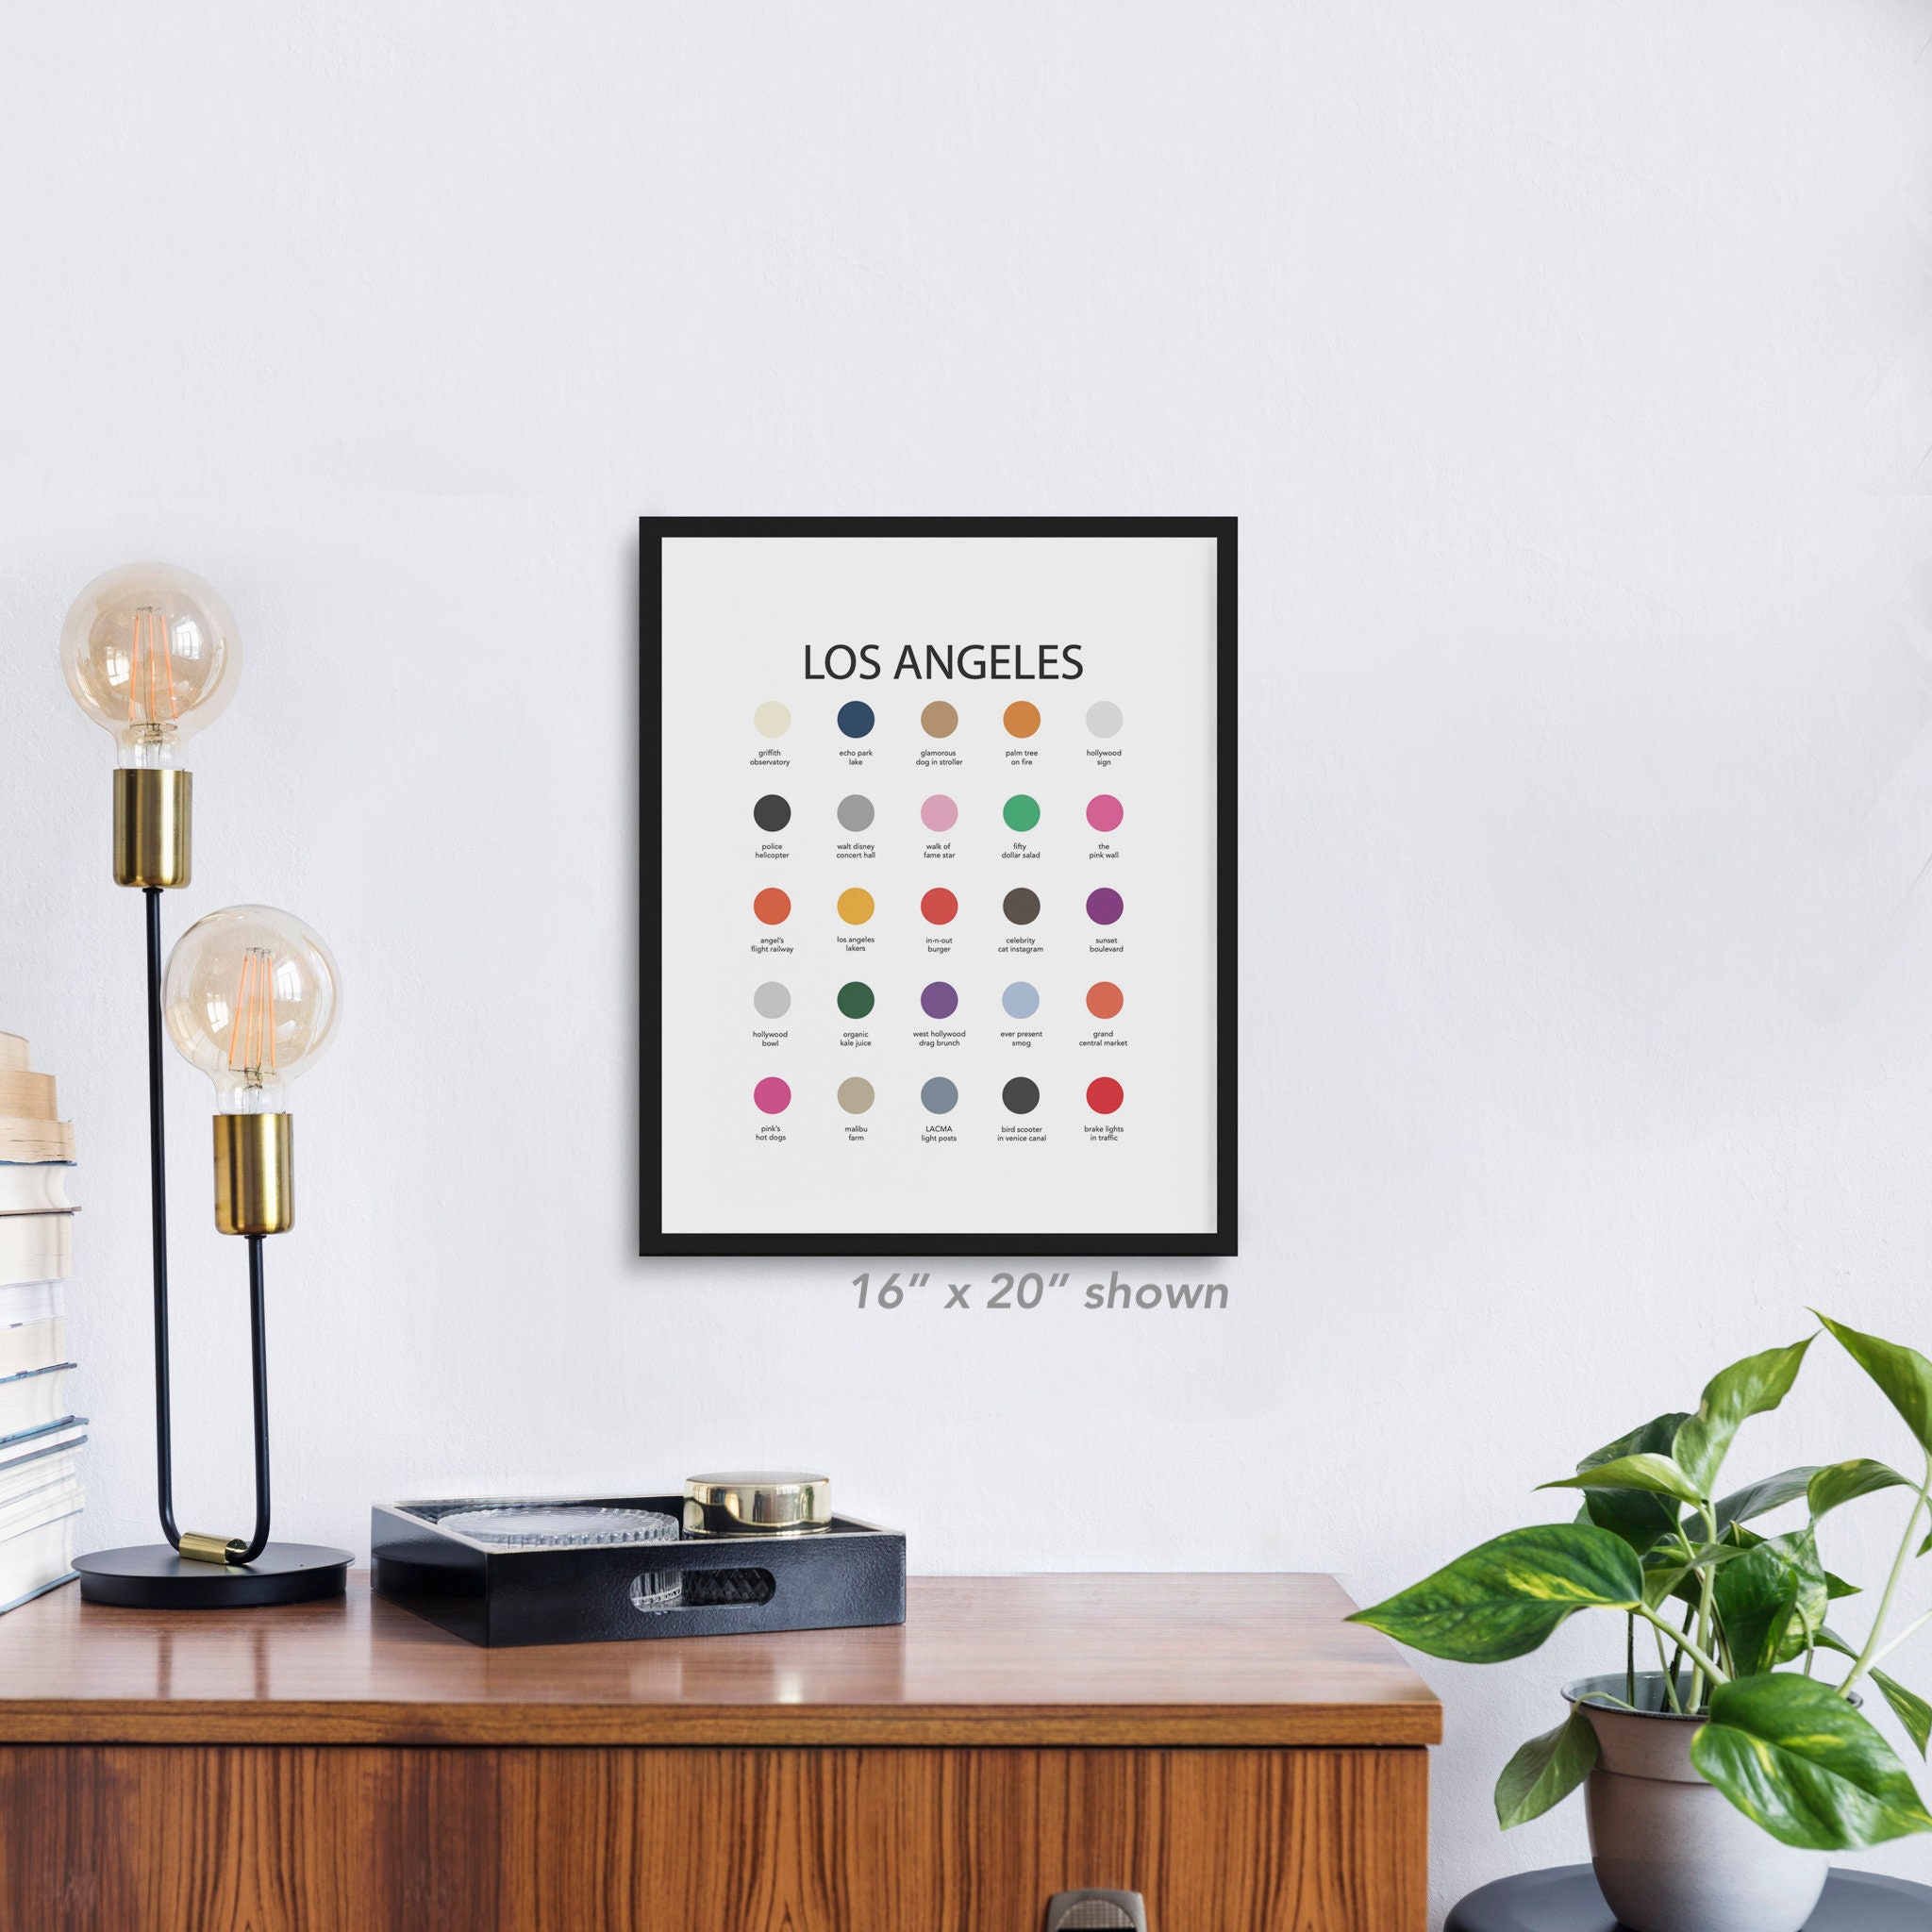 Los Los Home Angeles Map, Poster, Angeles Etsy Los Angeles Print Print, LA Map Poster, Decor, Palette Angeles Minimalist Color Wall Art City - Los